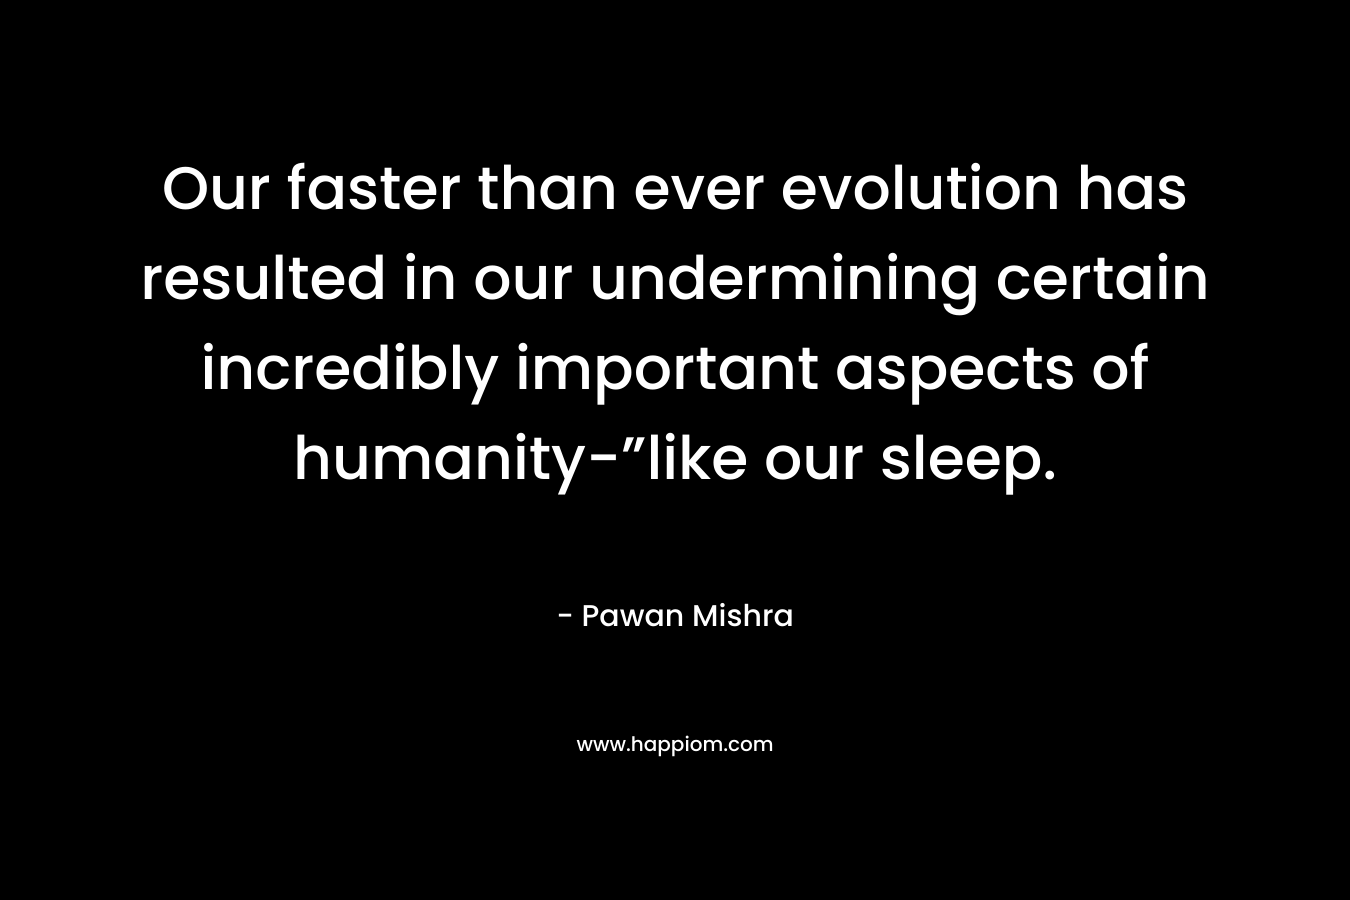 Our faster than ever evolution has resulted in our undermining certain incredibly important aspects of humanity-”like our sleep.